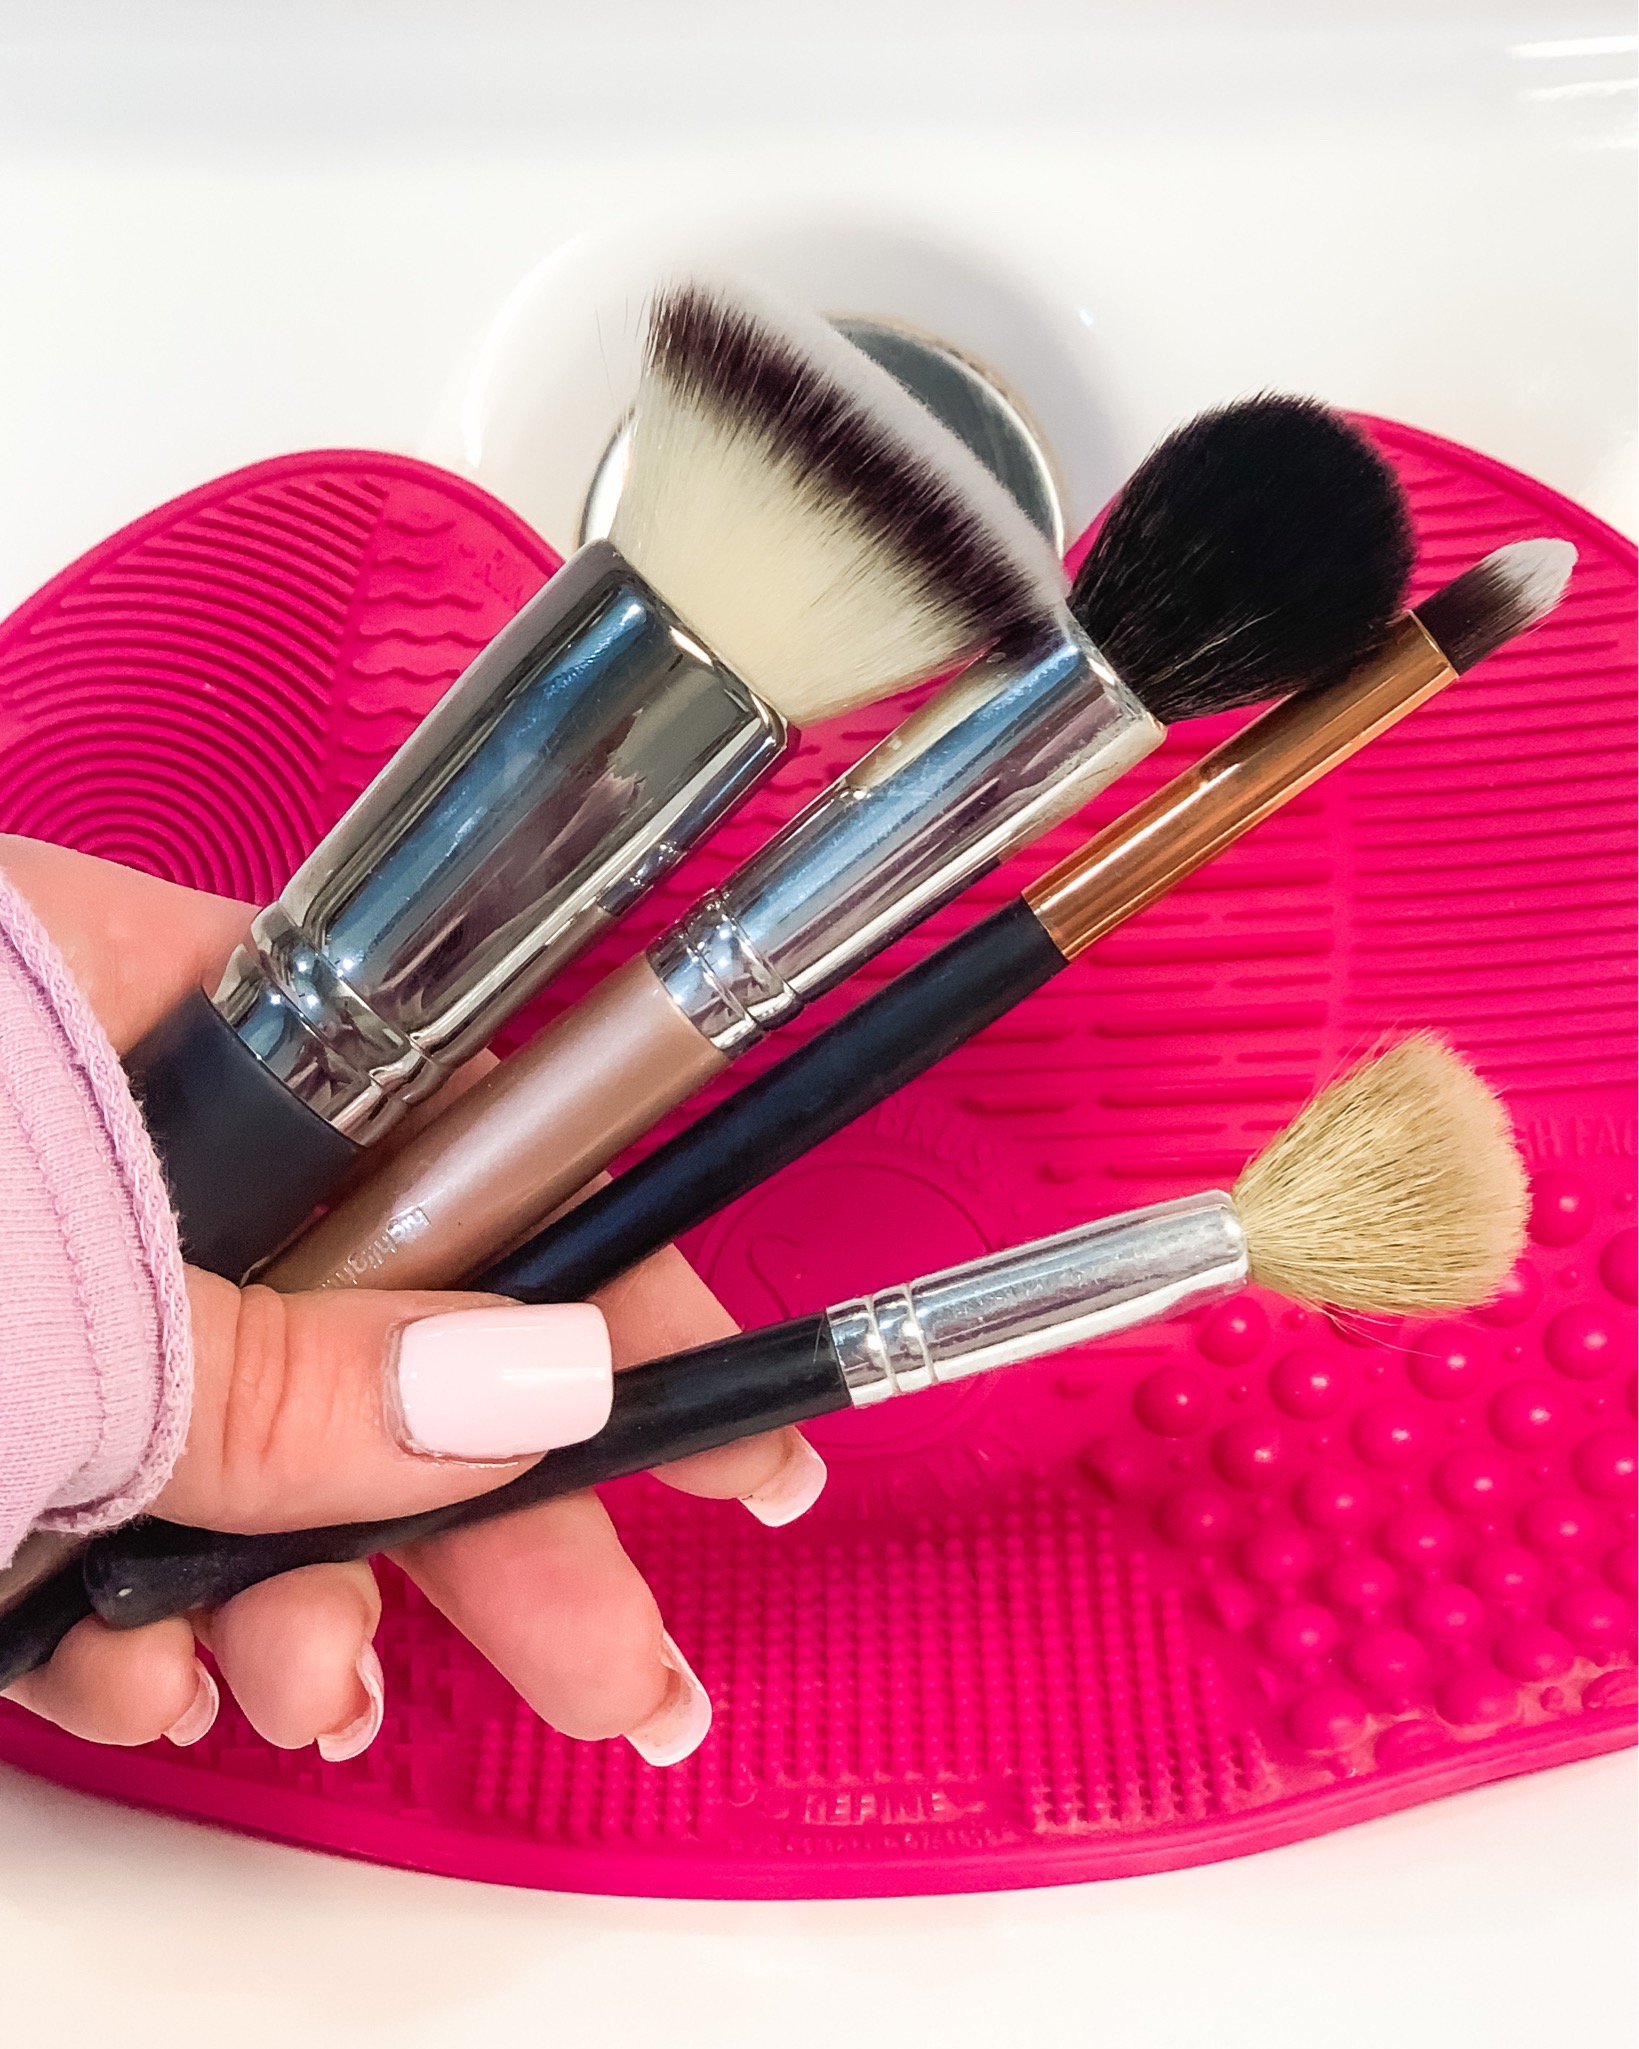 How To Clean Your Makeup Brushes ⋆ Gucci & Glam-Top US Fashion and Beauty  Blog